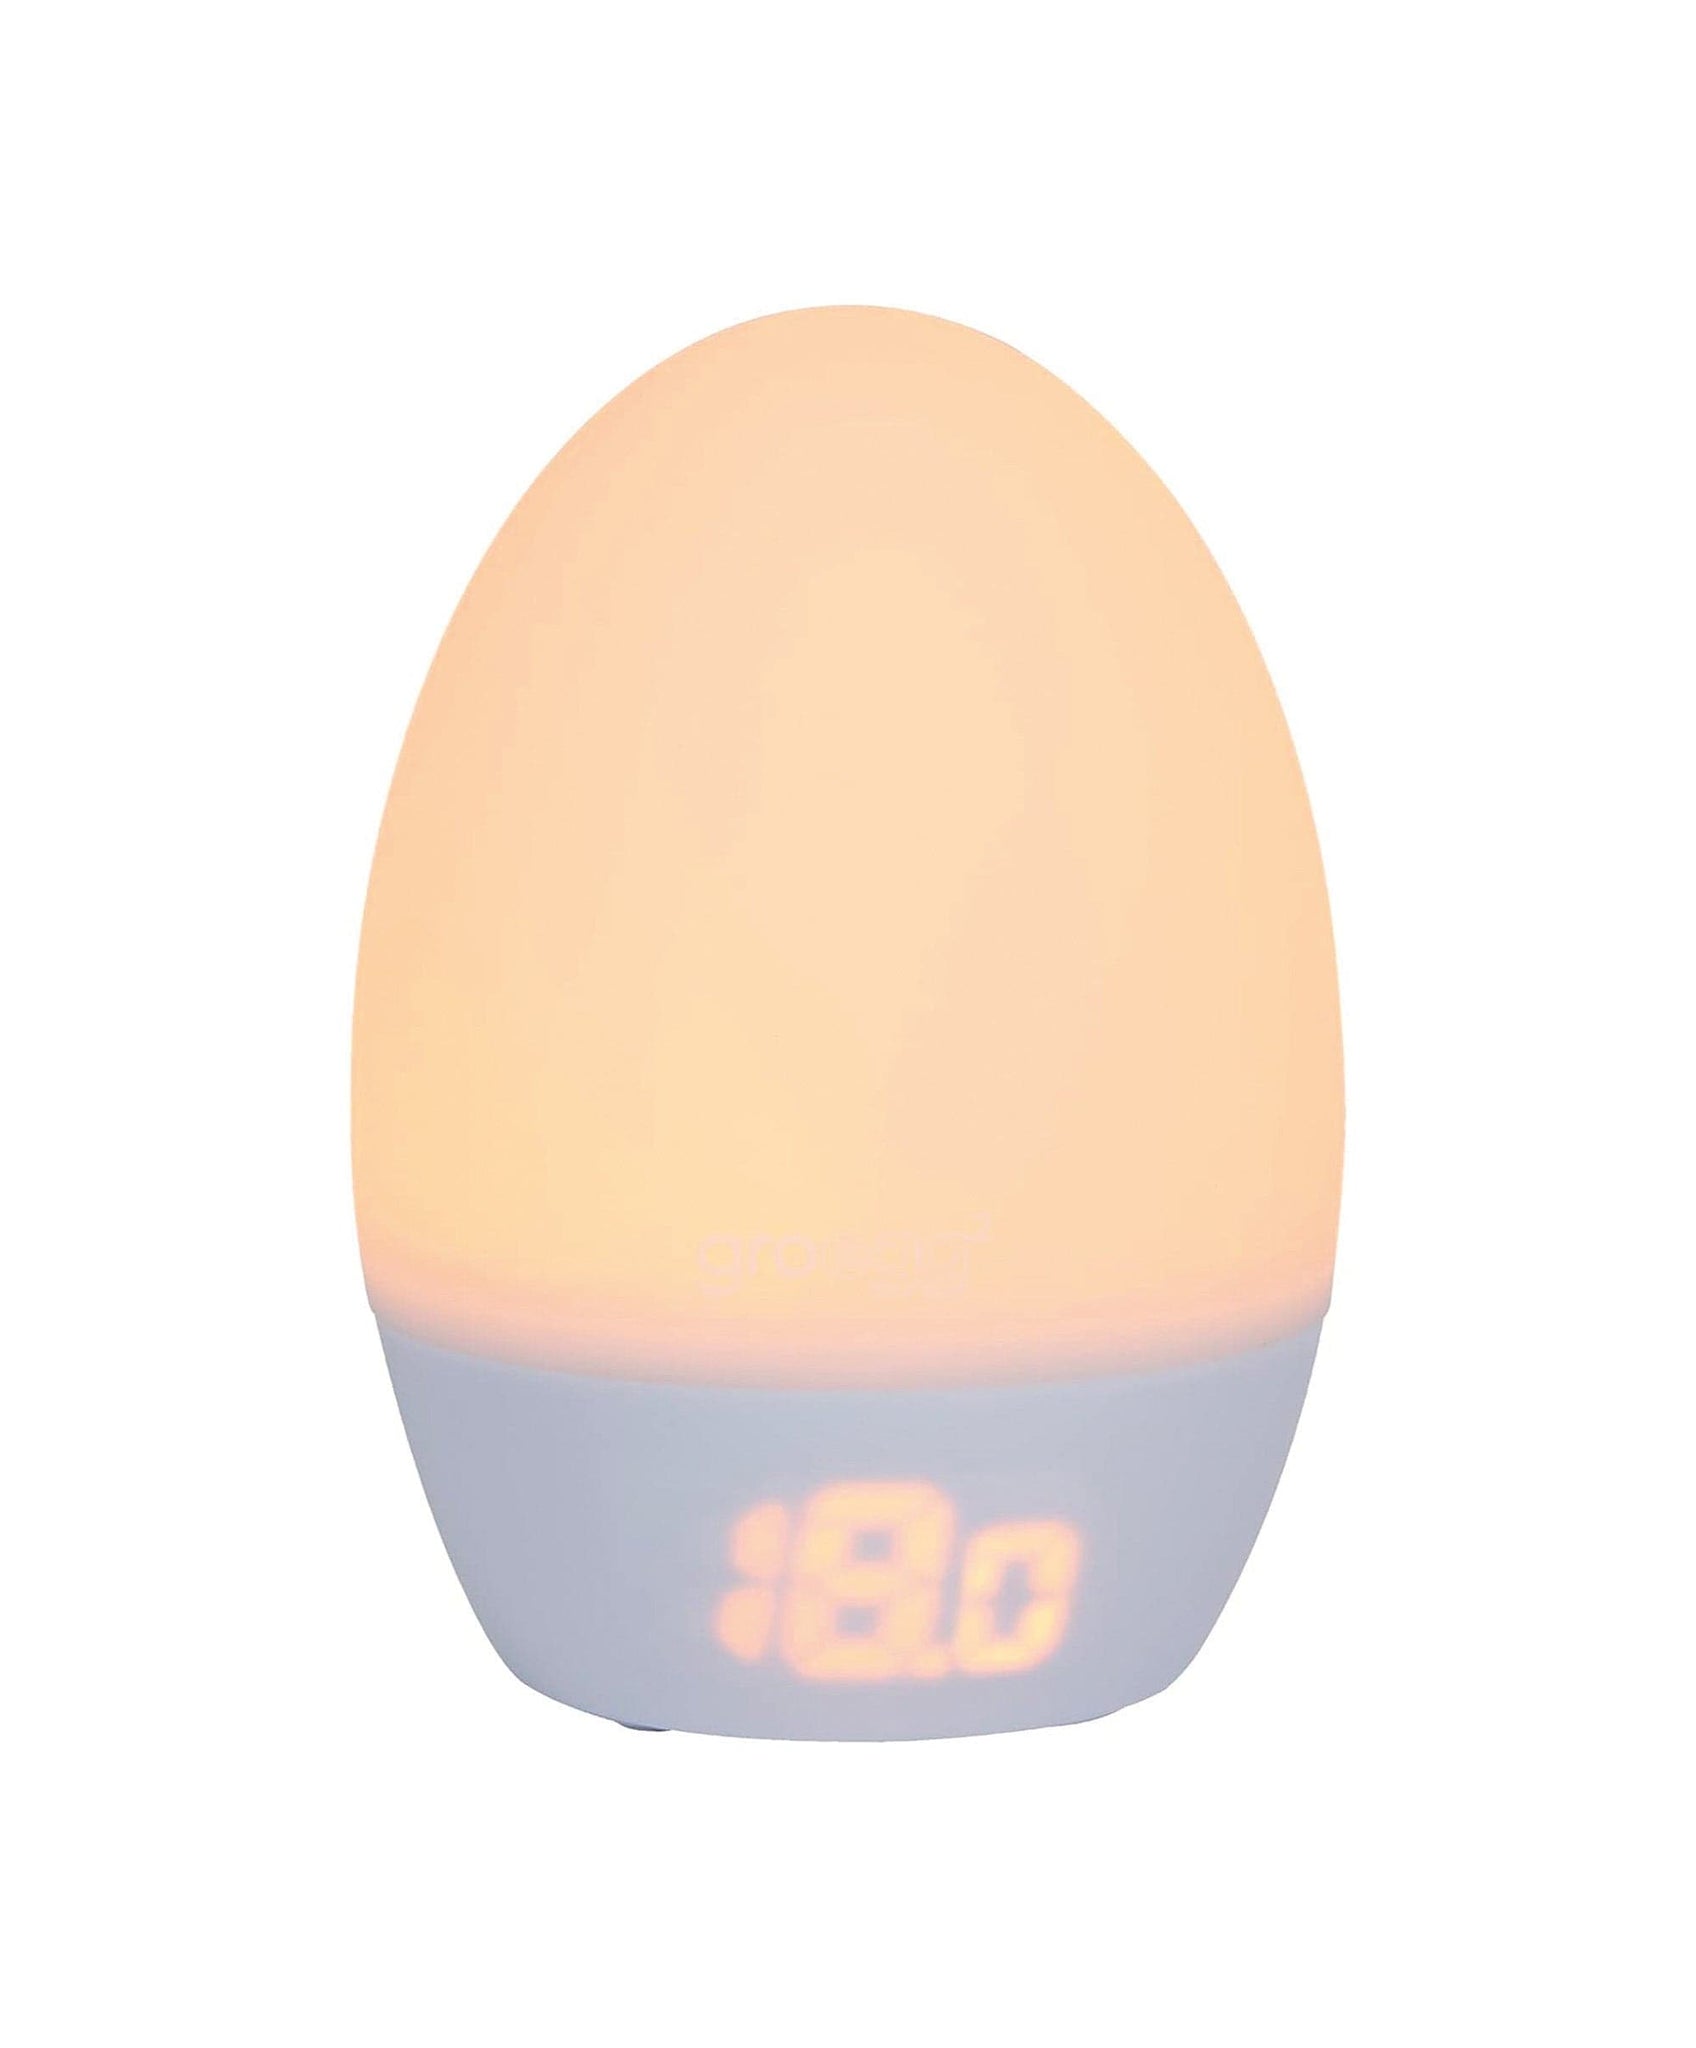 Gro-Egg Color Changing Digital Room Thermometer, White [Baby Product] :  : Baby